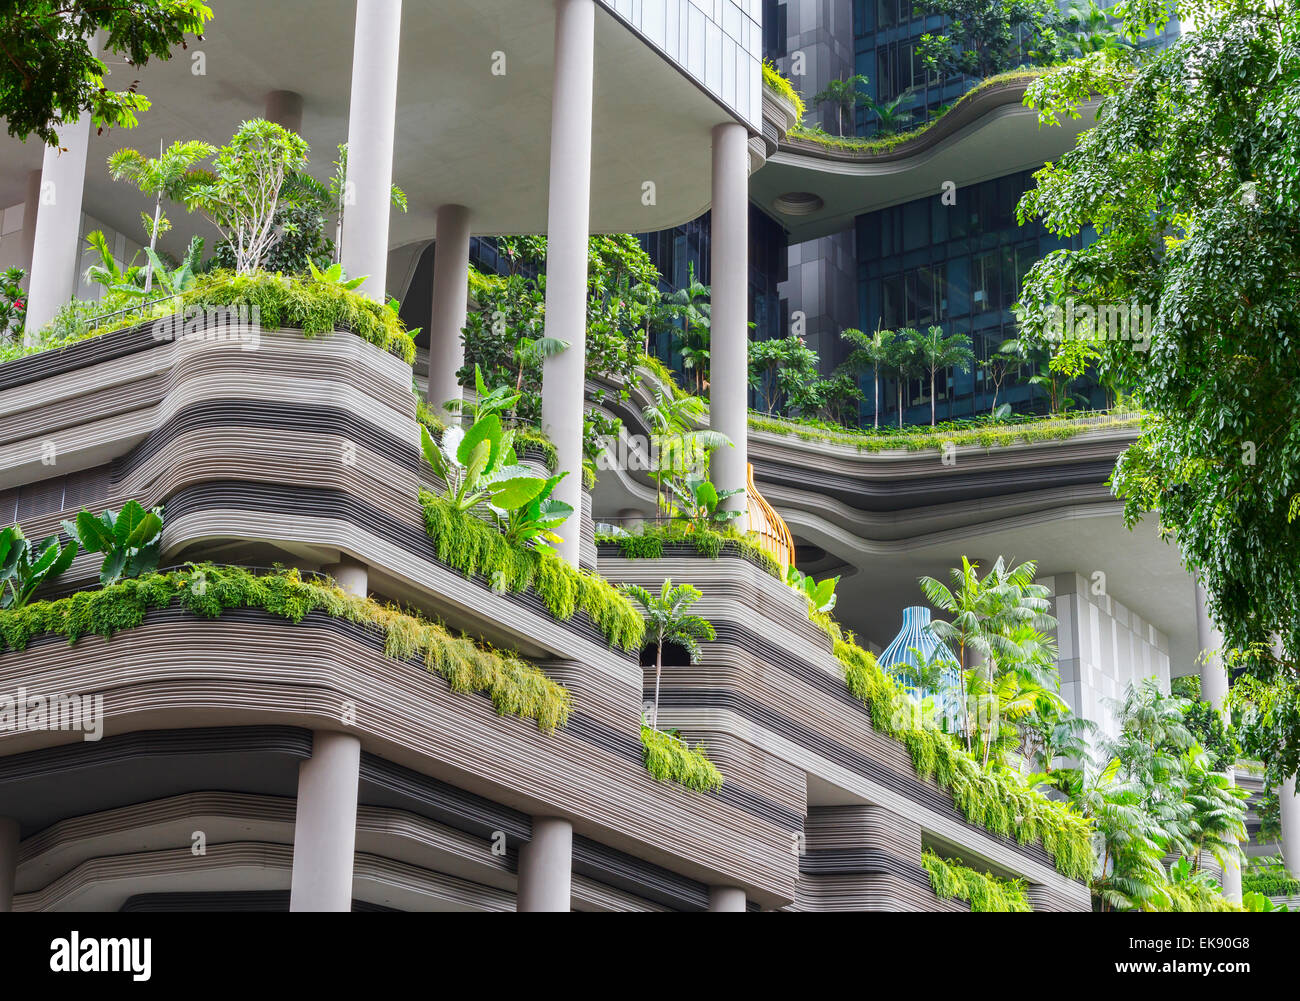 Hotel with luxuriant balconies Stock Photo